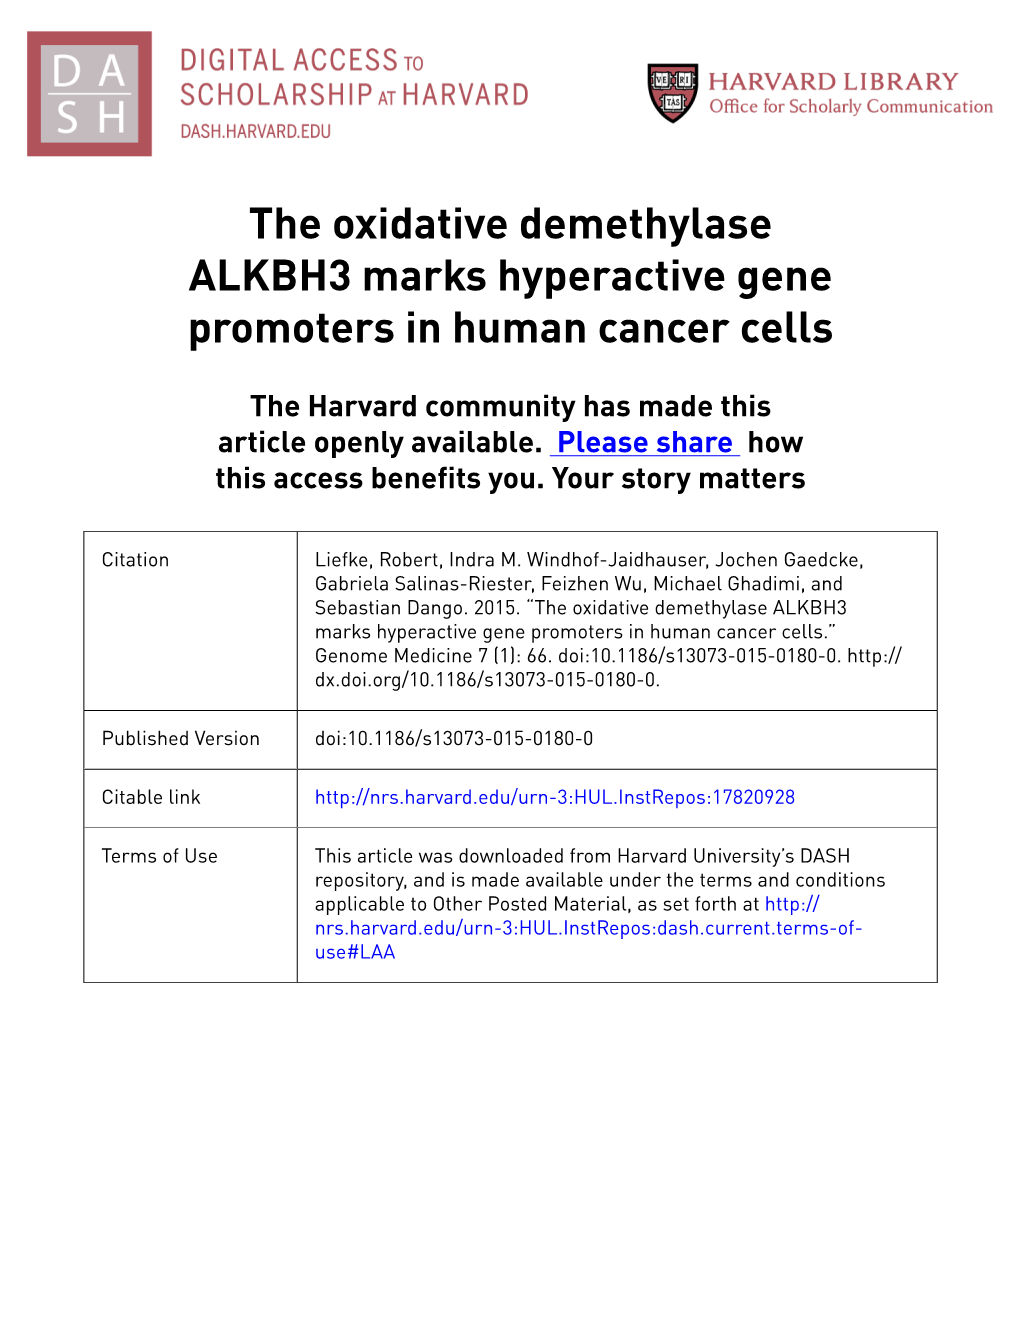 The Oxidative Demethylase ALKBH3 Marks Hyperactive Gene Promoters in Human Cancer Cells